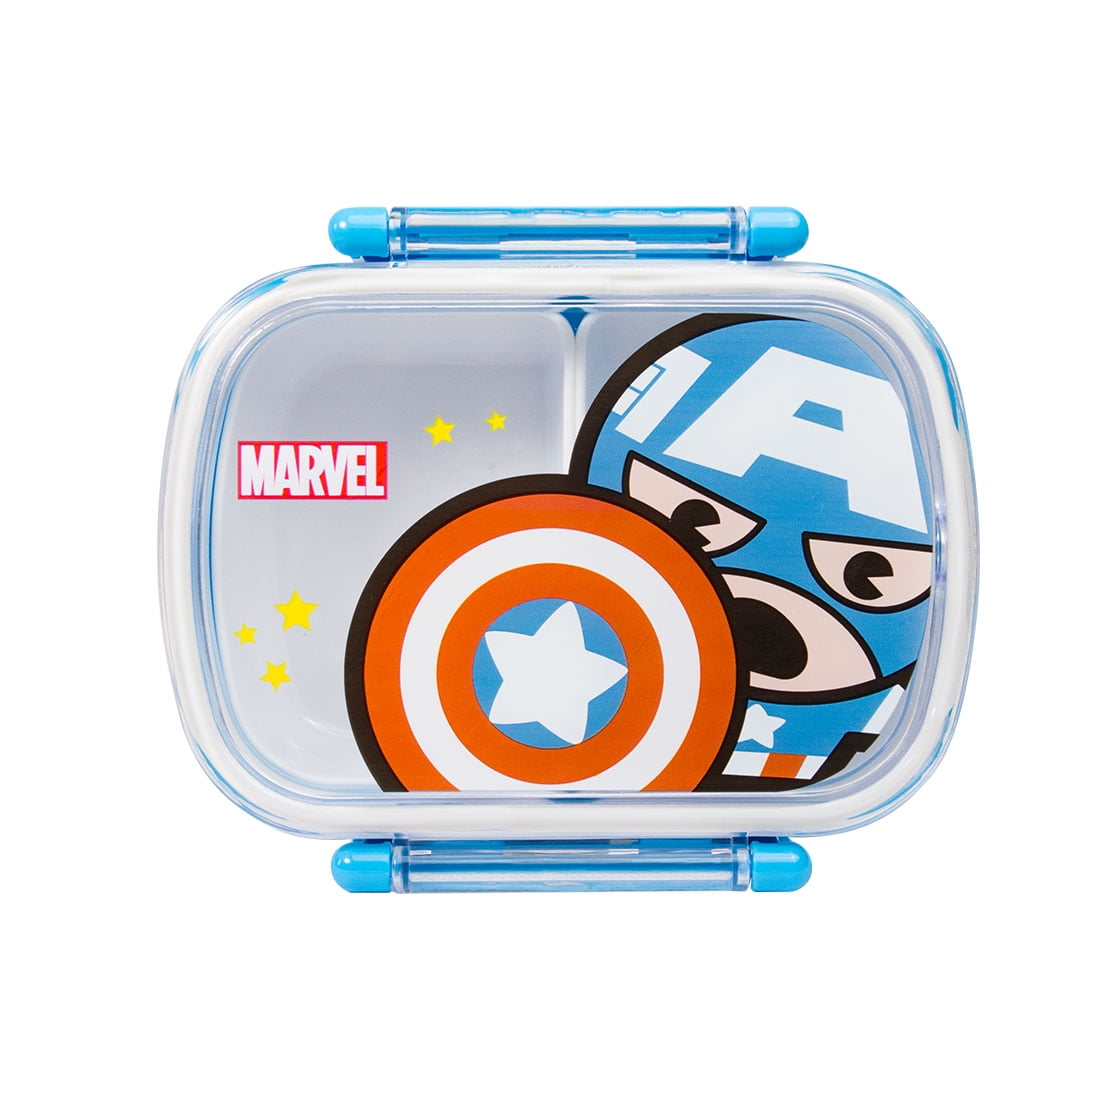 MINISO Indonesia on X: Let's talk about meal ideas to fill in this Spider-Man  lunch box. Do you like Asian food like bento rice or Western cuisine like  burgers? #miniso #minisolife  /